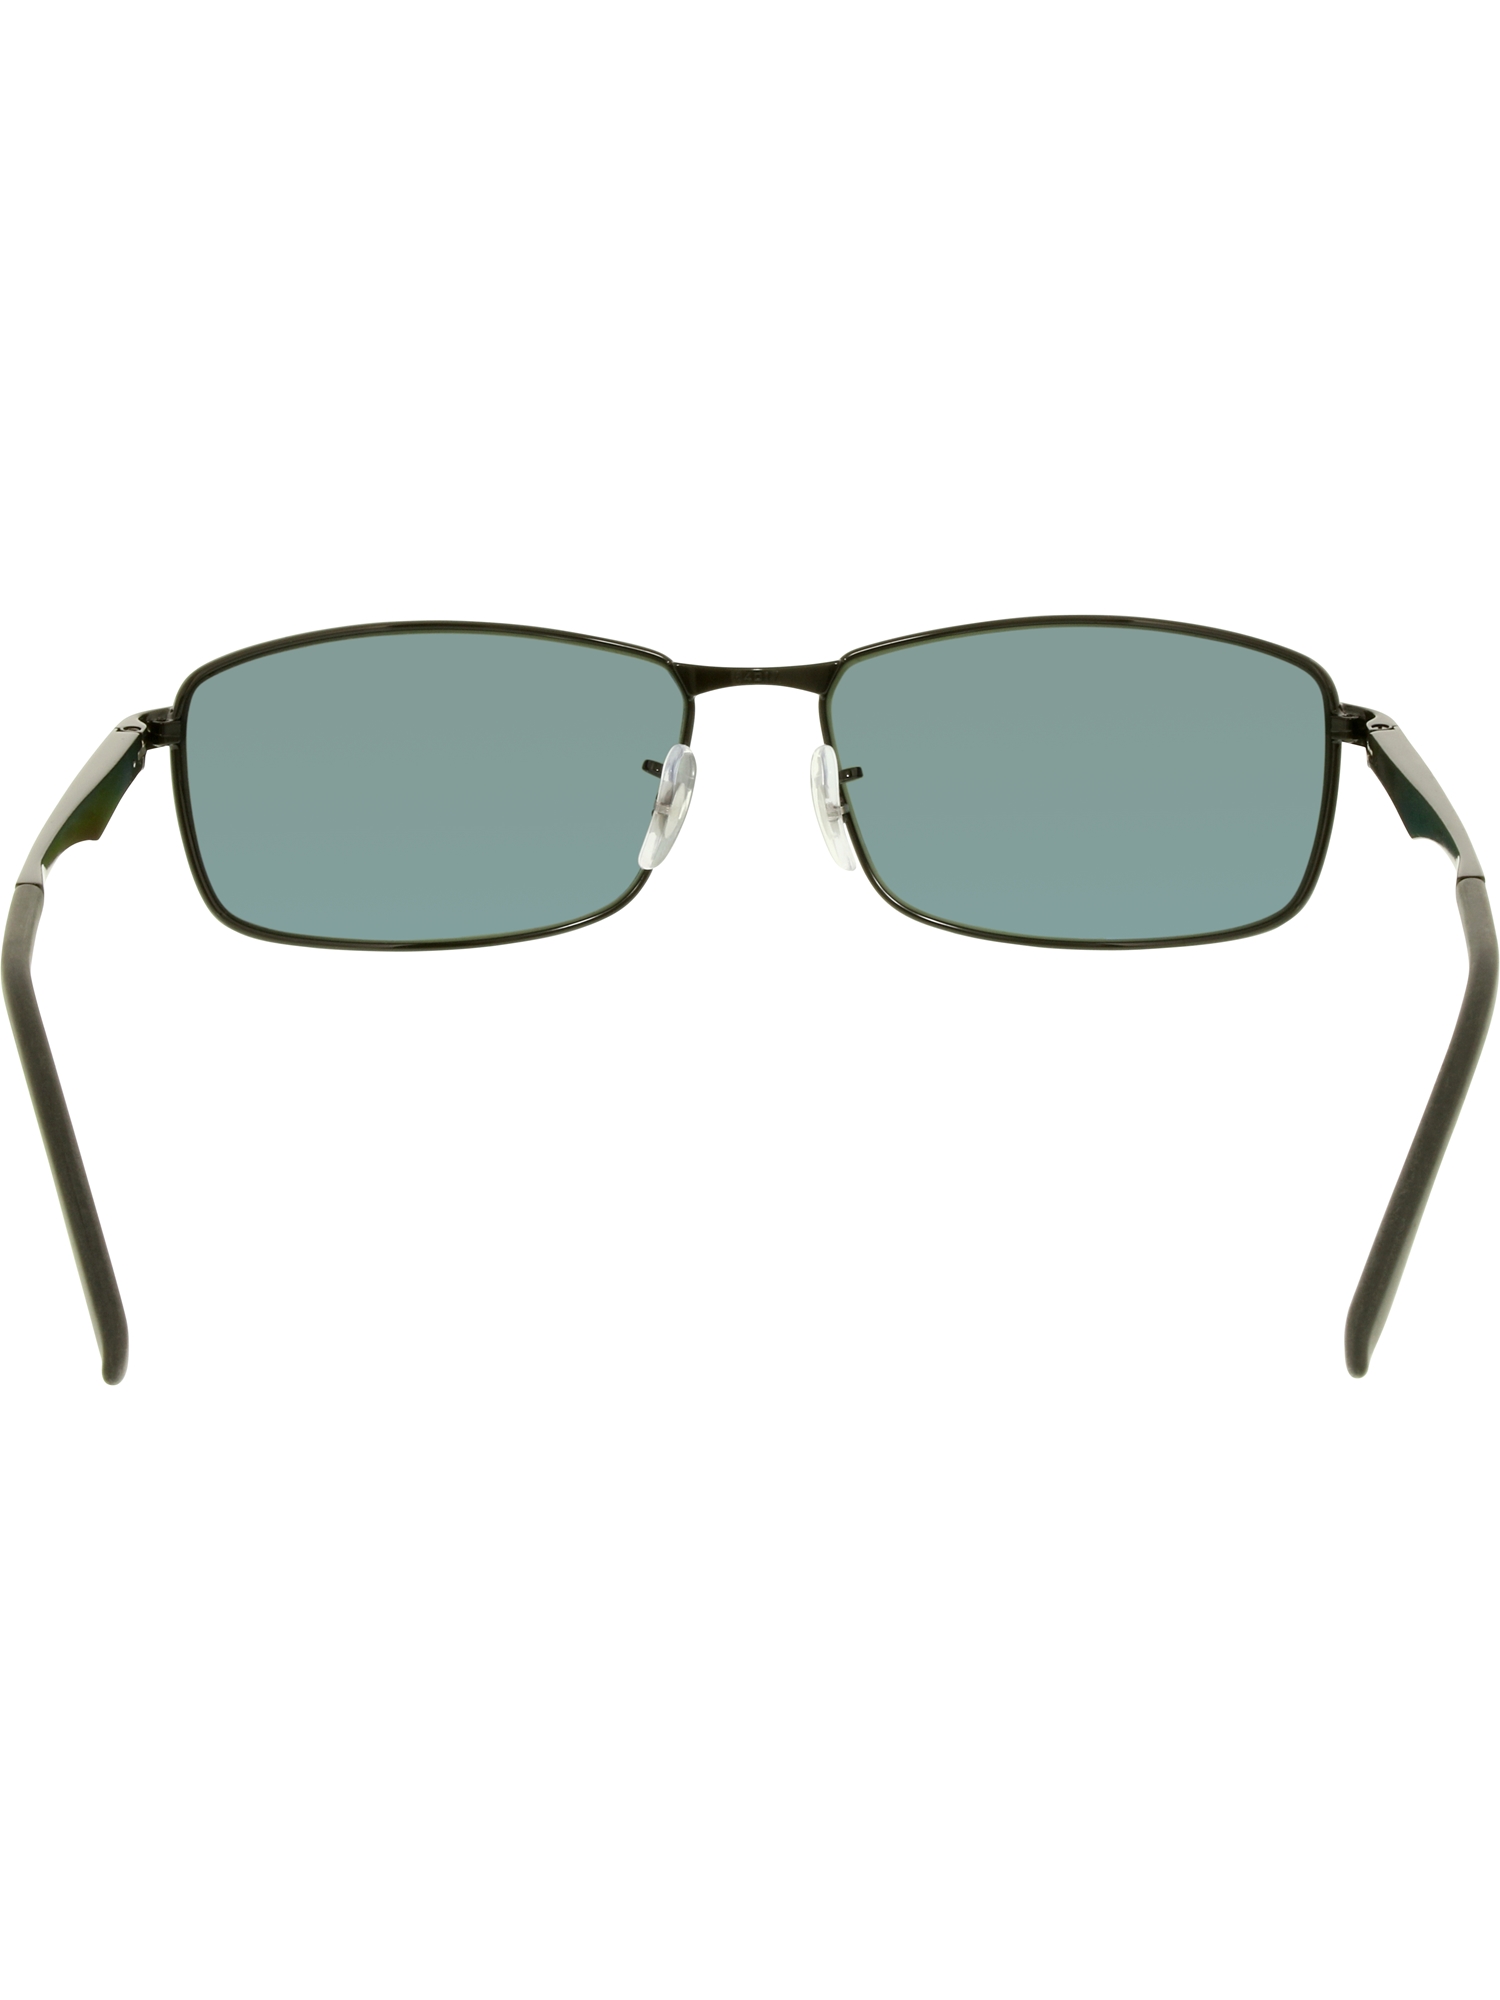 Ray Ban RB 3498 002/9A - Black/Green Polarized by Ray Ban for Men - 64-17-135 mm Sunglasses - image 3 of 3